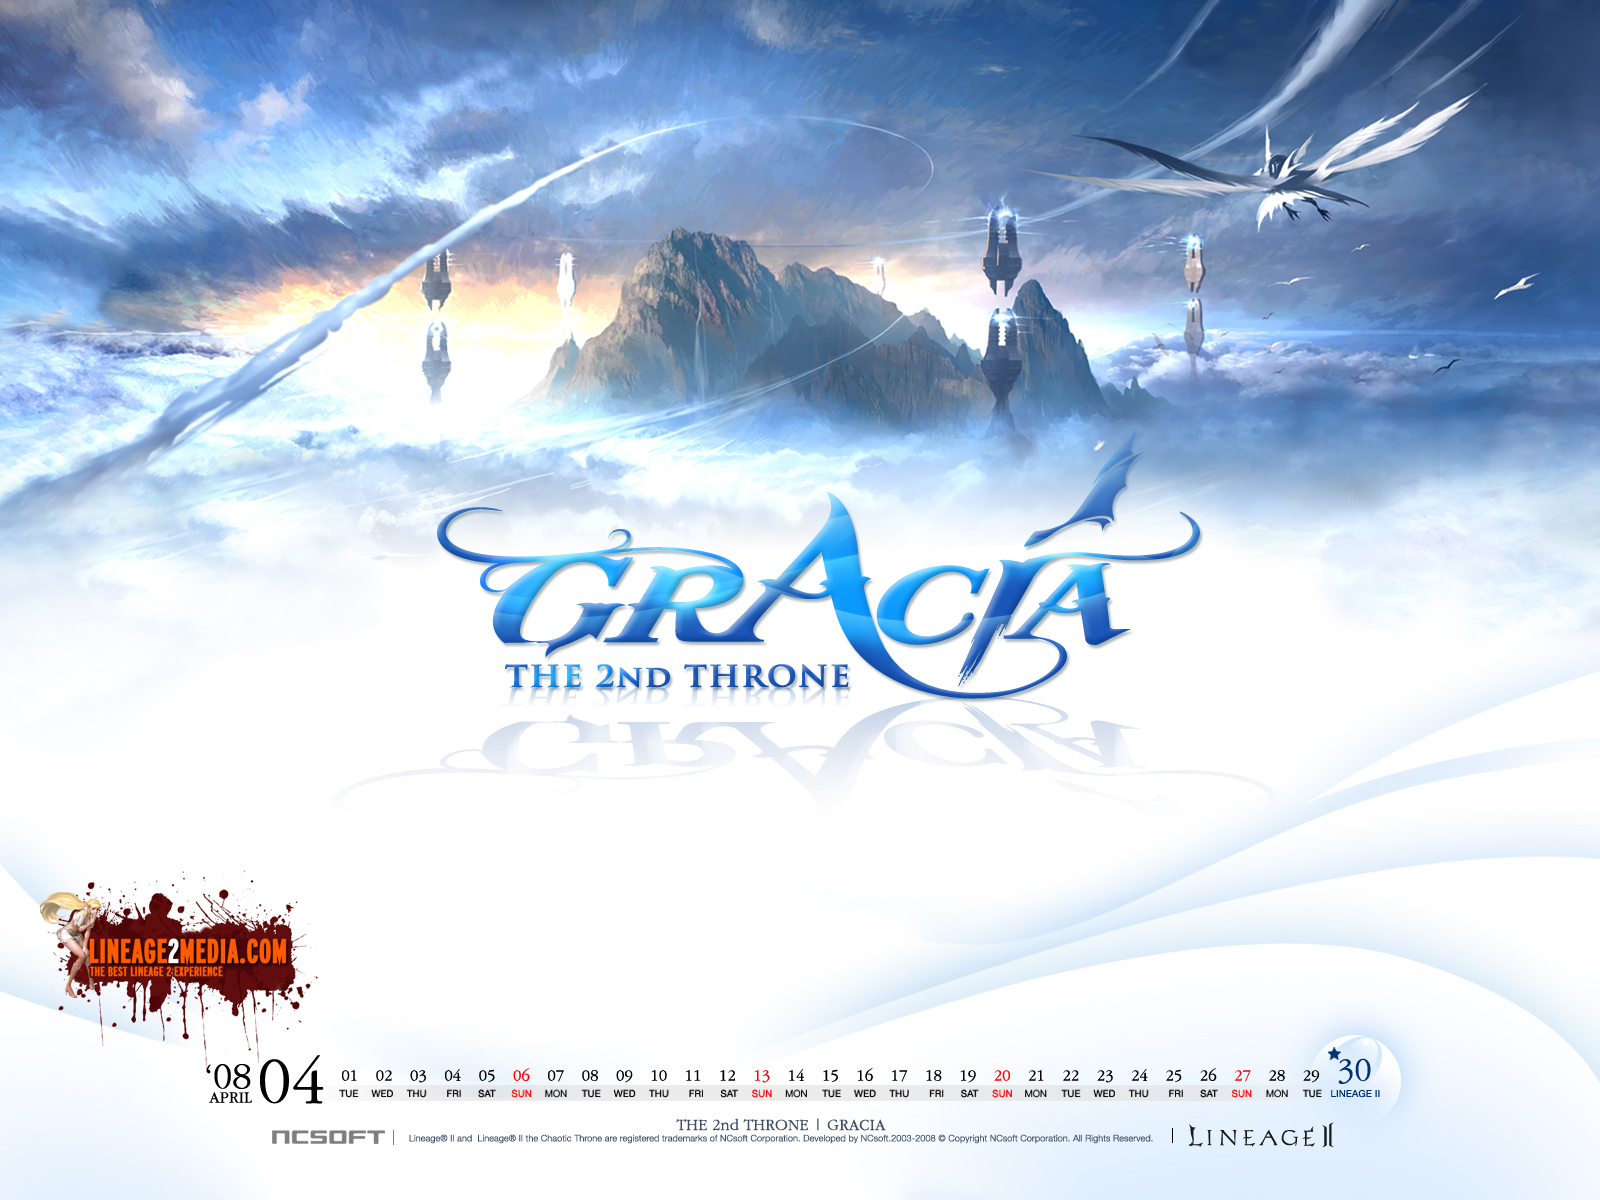 http://www.lineage2media.com/pictures/graciawallpaper2.jpg